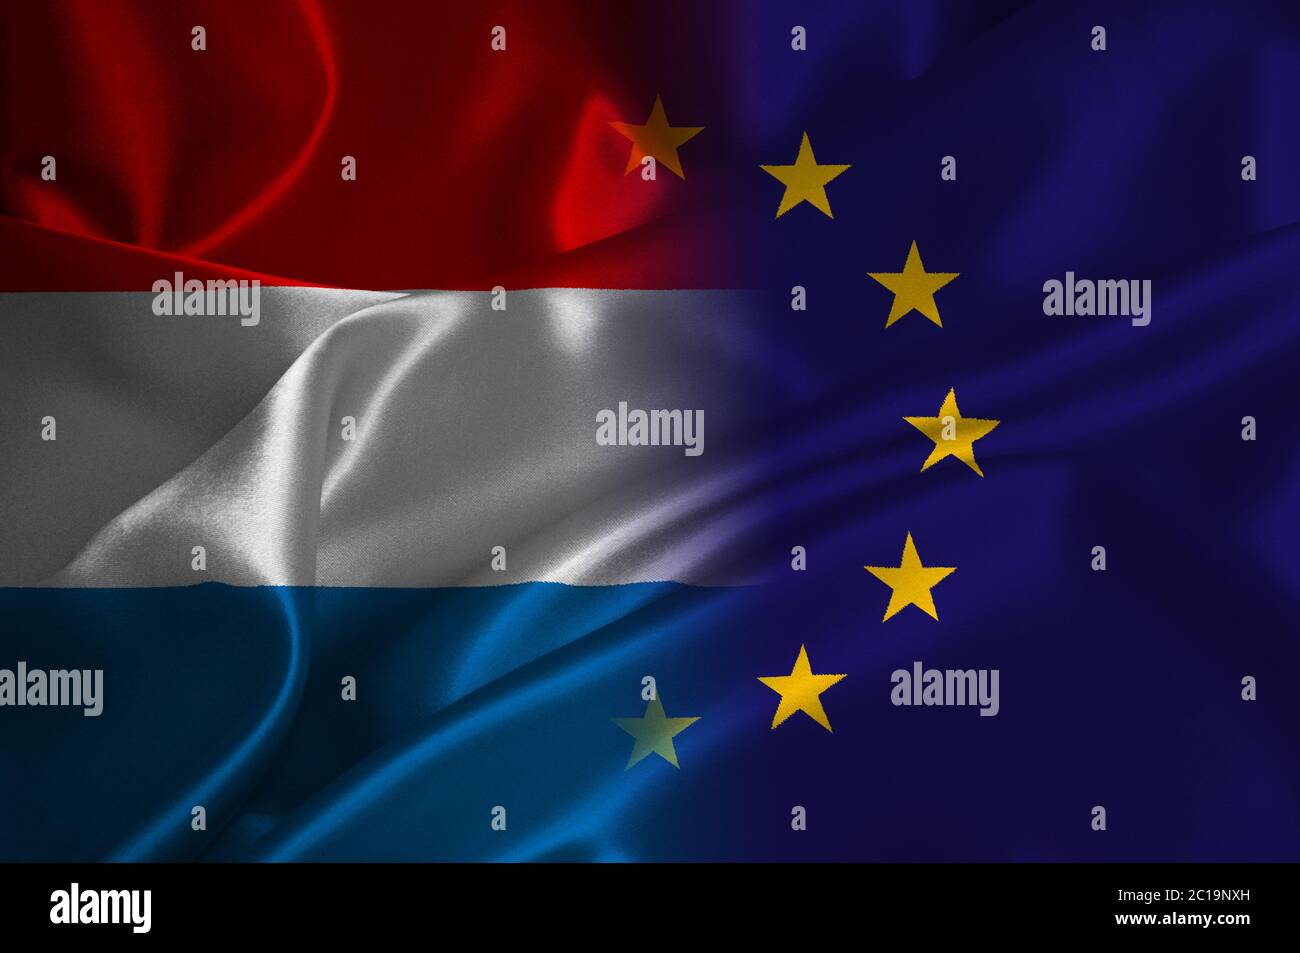 EU flag and Luxembourg flag on satin texture Stock Photo